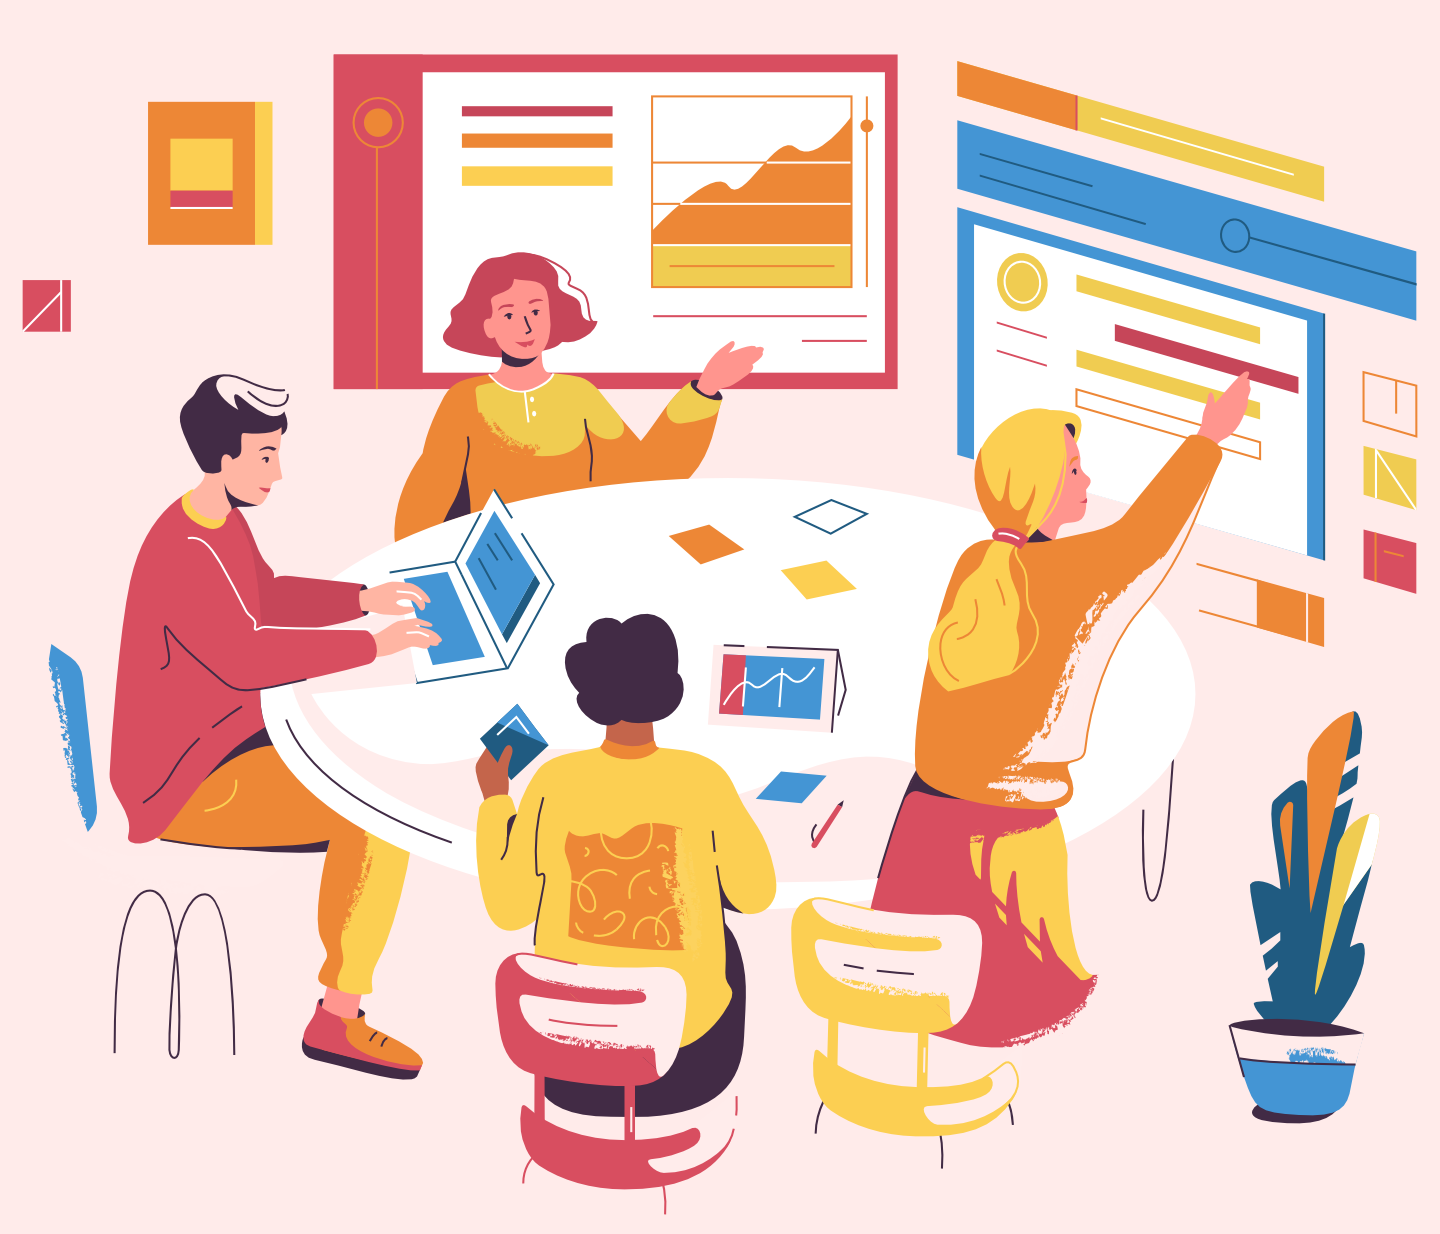 Illustration featuring other professionals in a meeting.